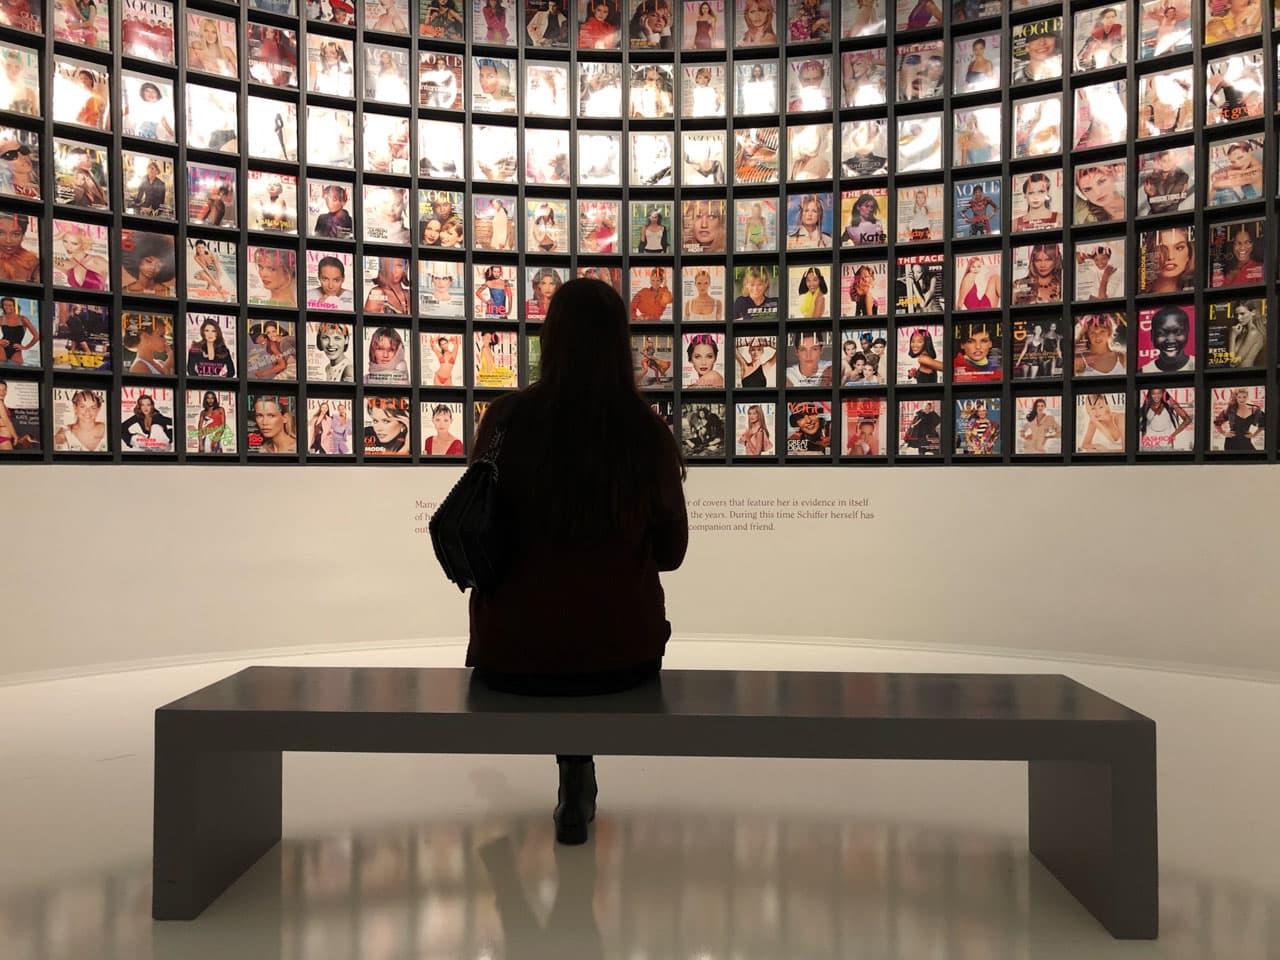 A woman sitting on a bench looking at a wall of framed old magazine covers